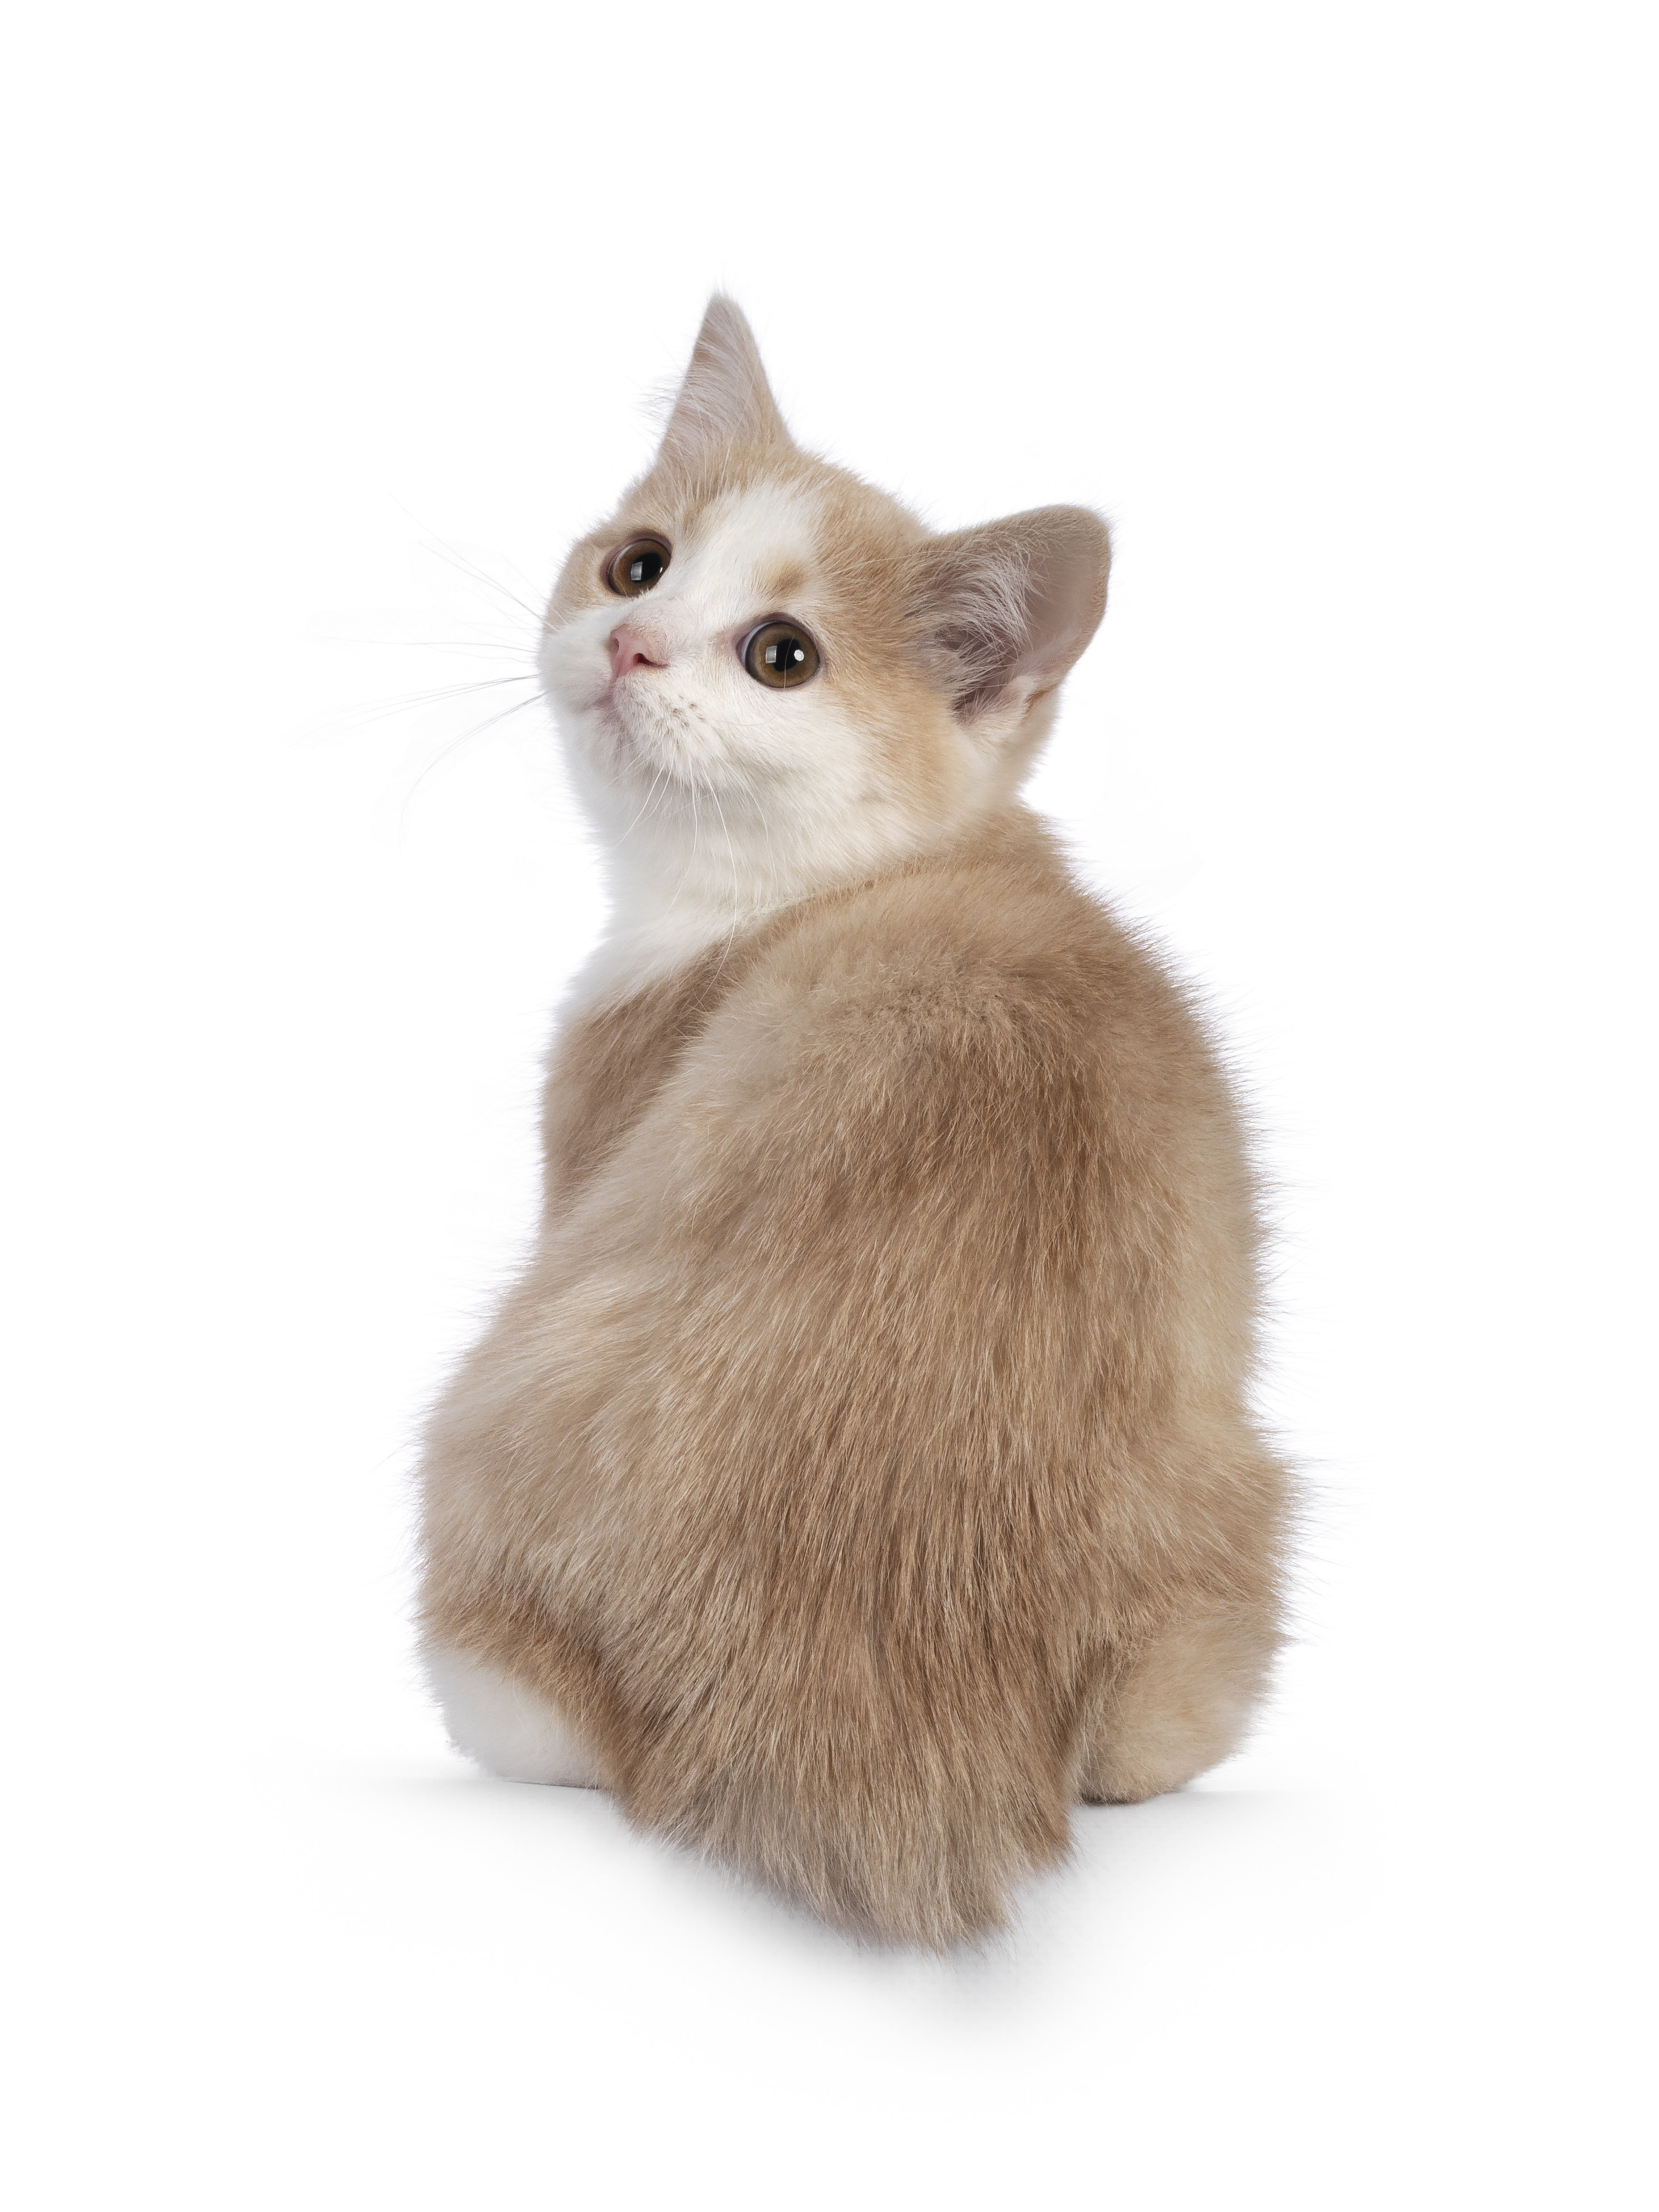 Adorable tailless Manx cat kitten, sitting backwards on edge looking towards camera with sweet droopy eyes